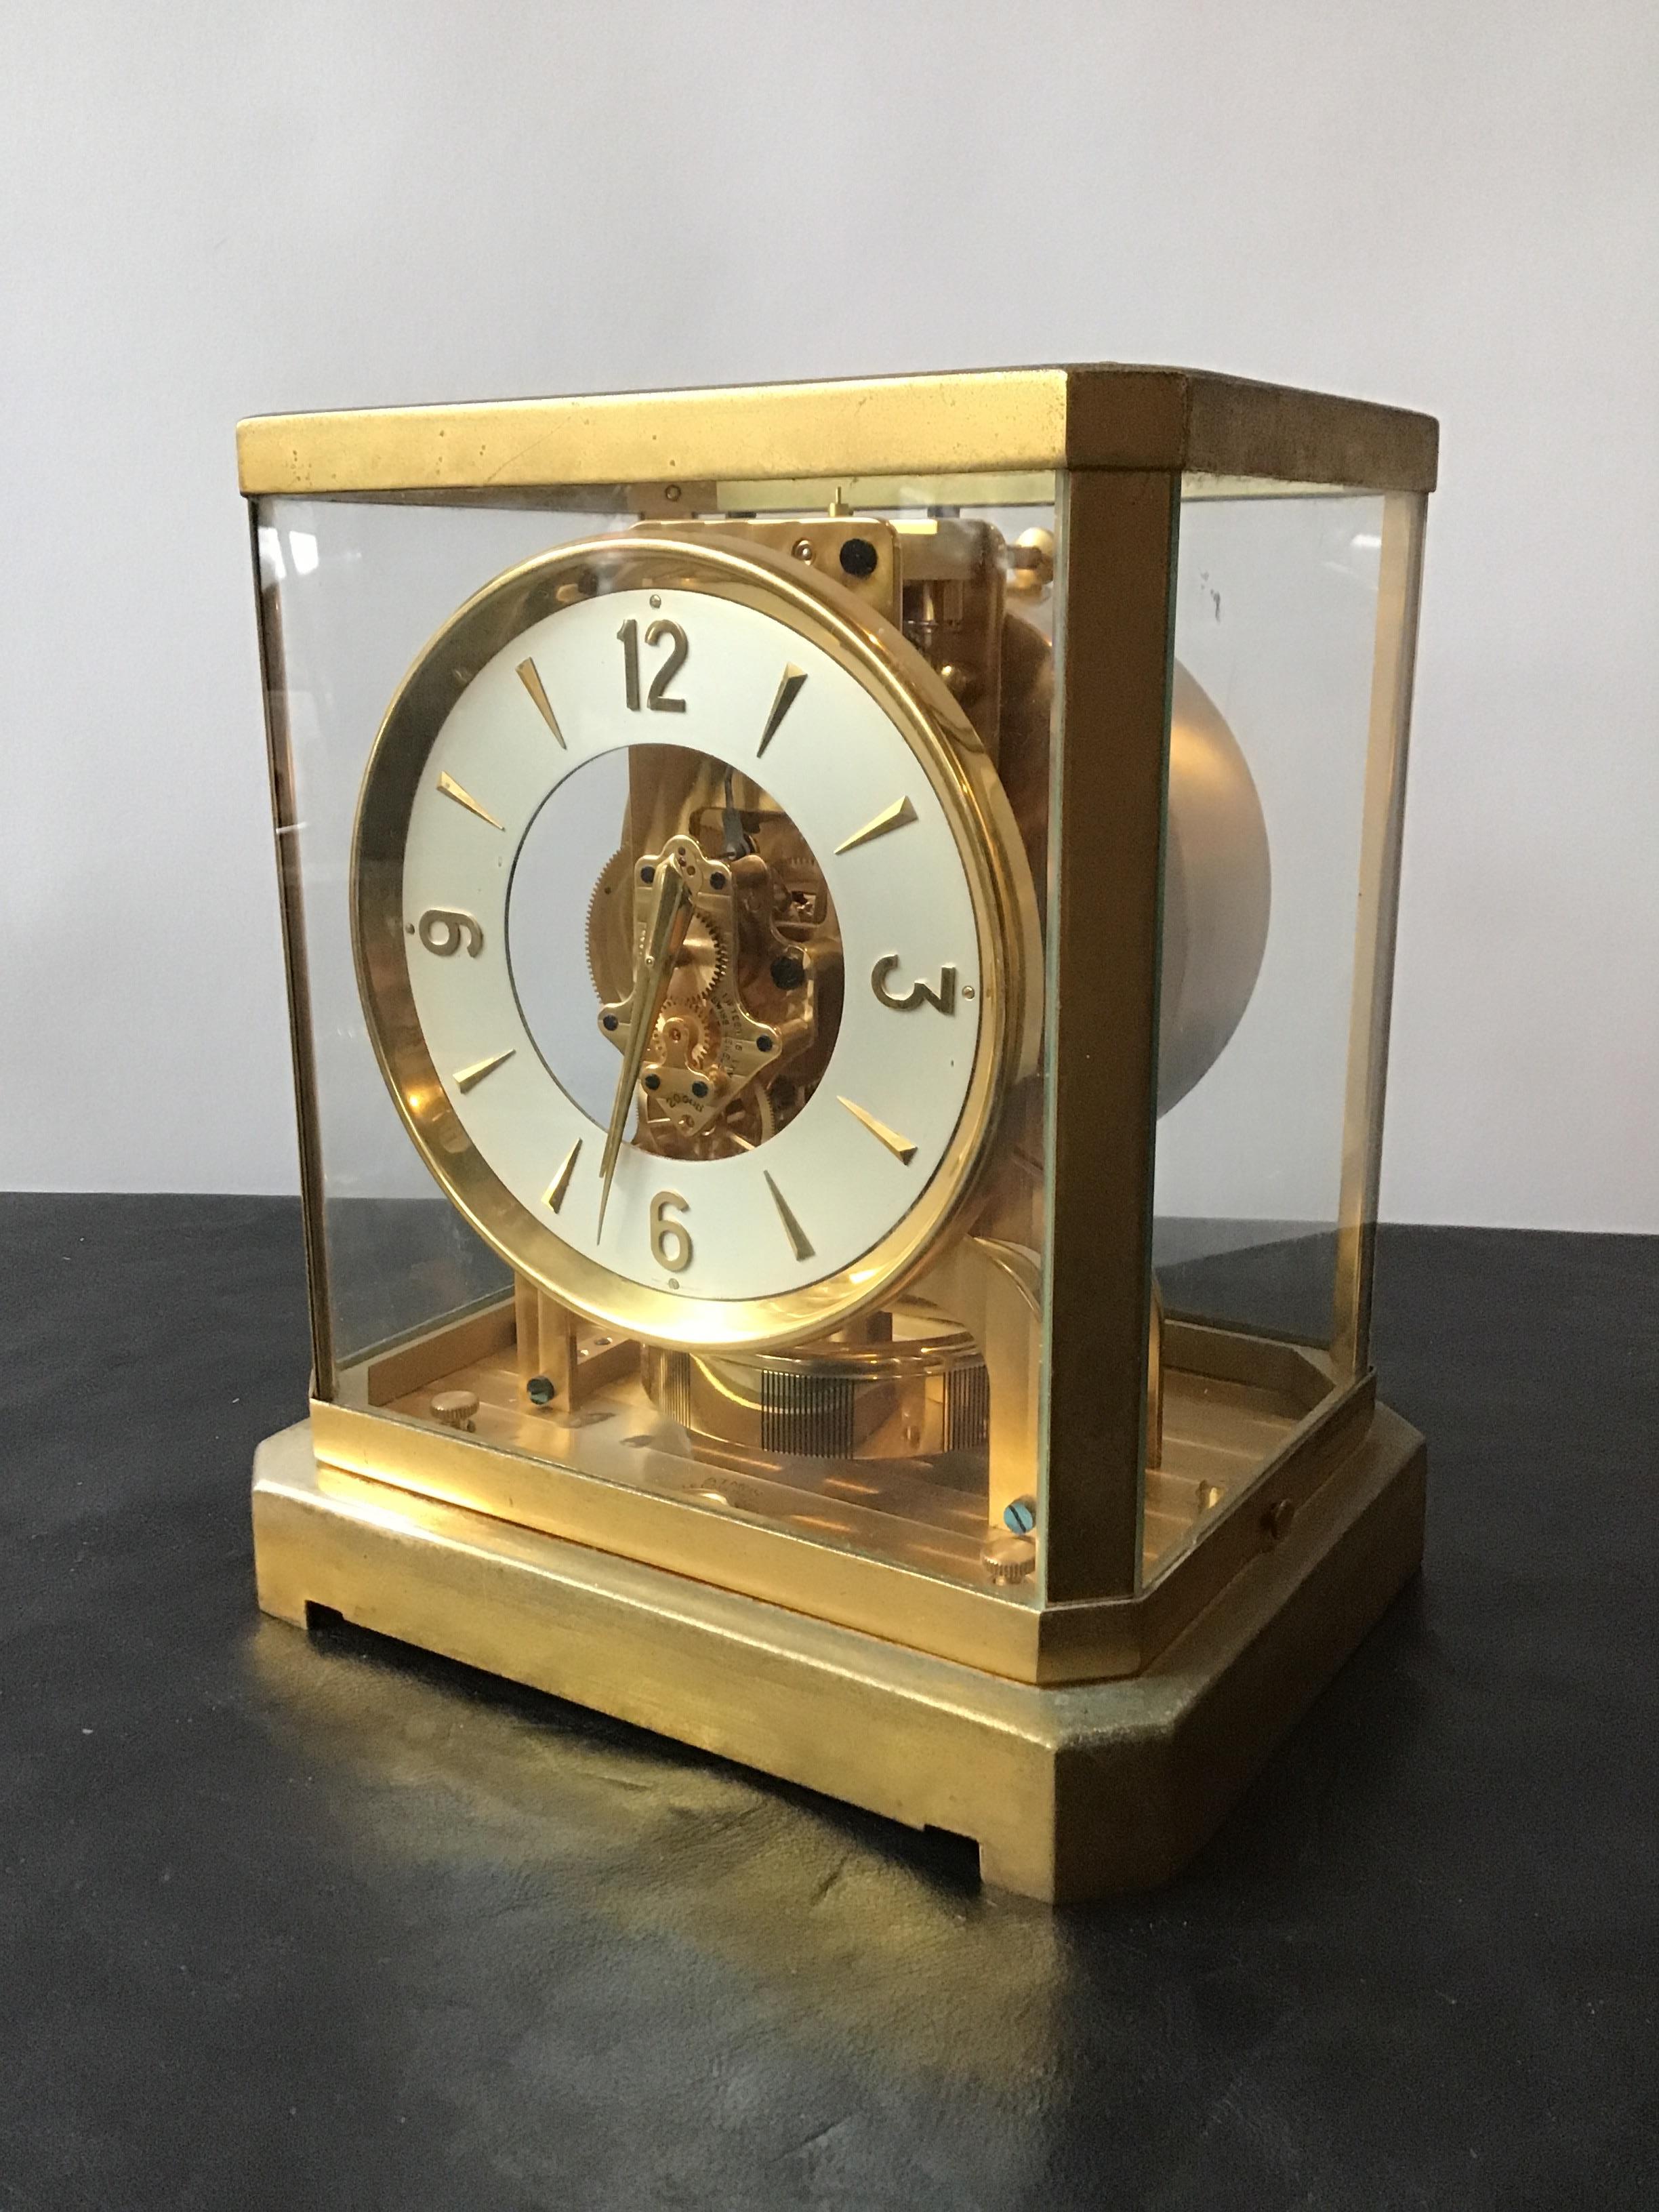 LeCoultre Atmos clock, serial number 20386. I have not tried to start this clock. I assume it does not work. I’m selling it as is. Assume it does not work.